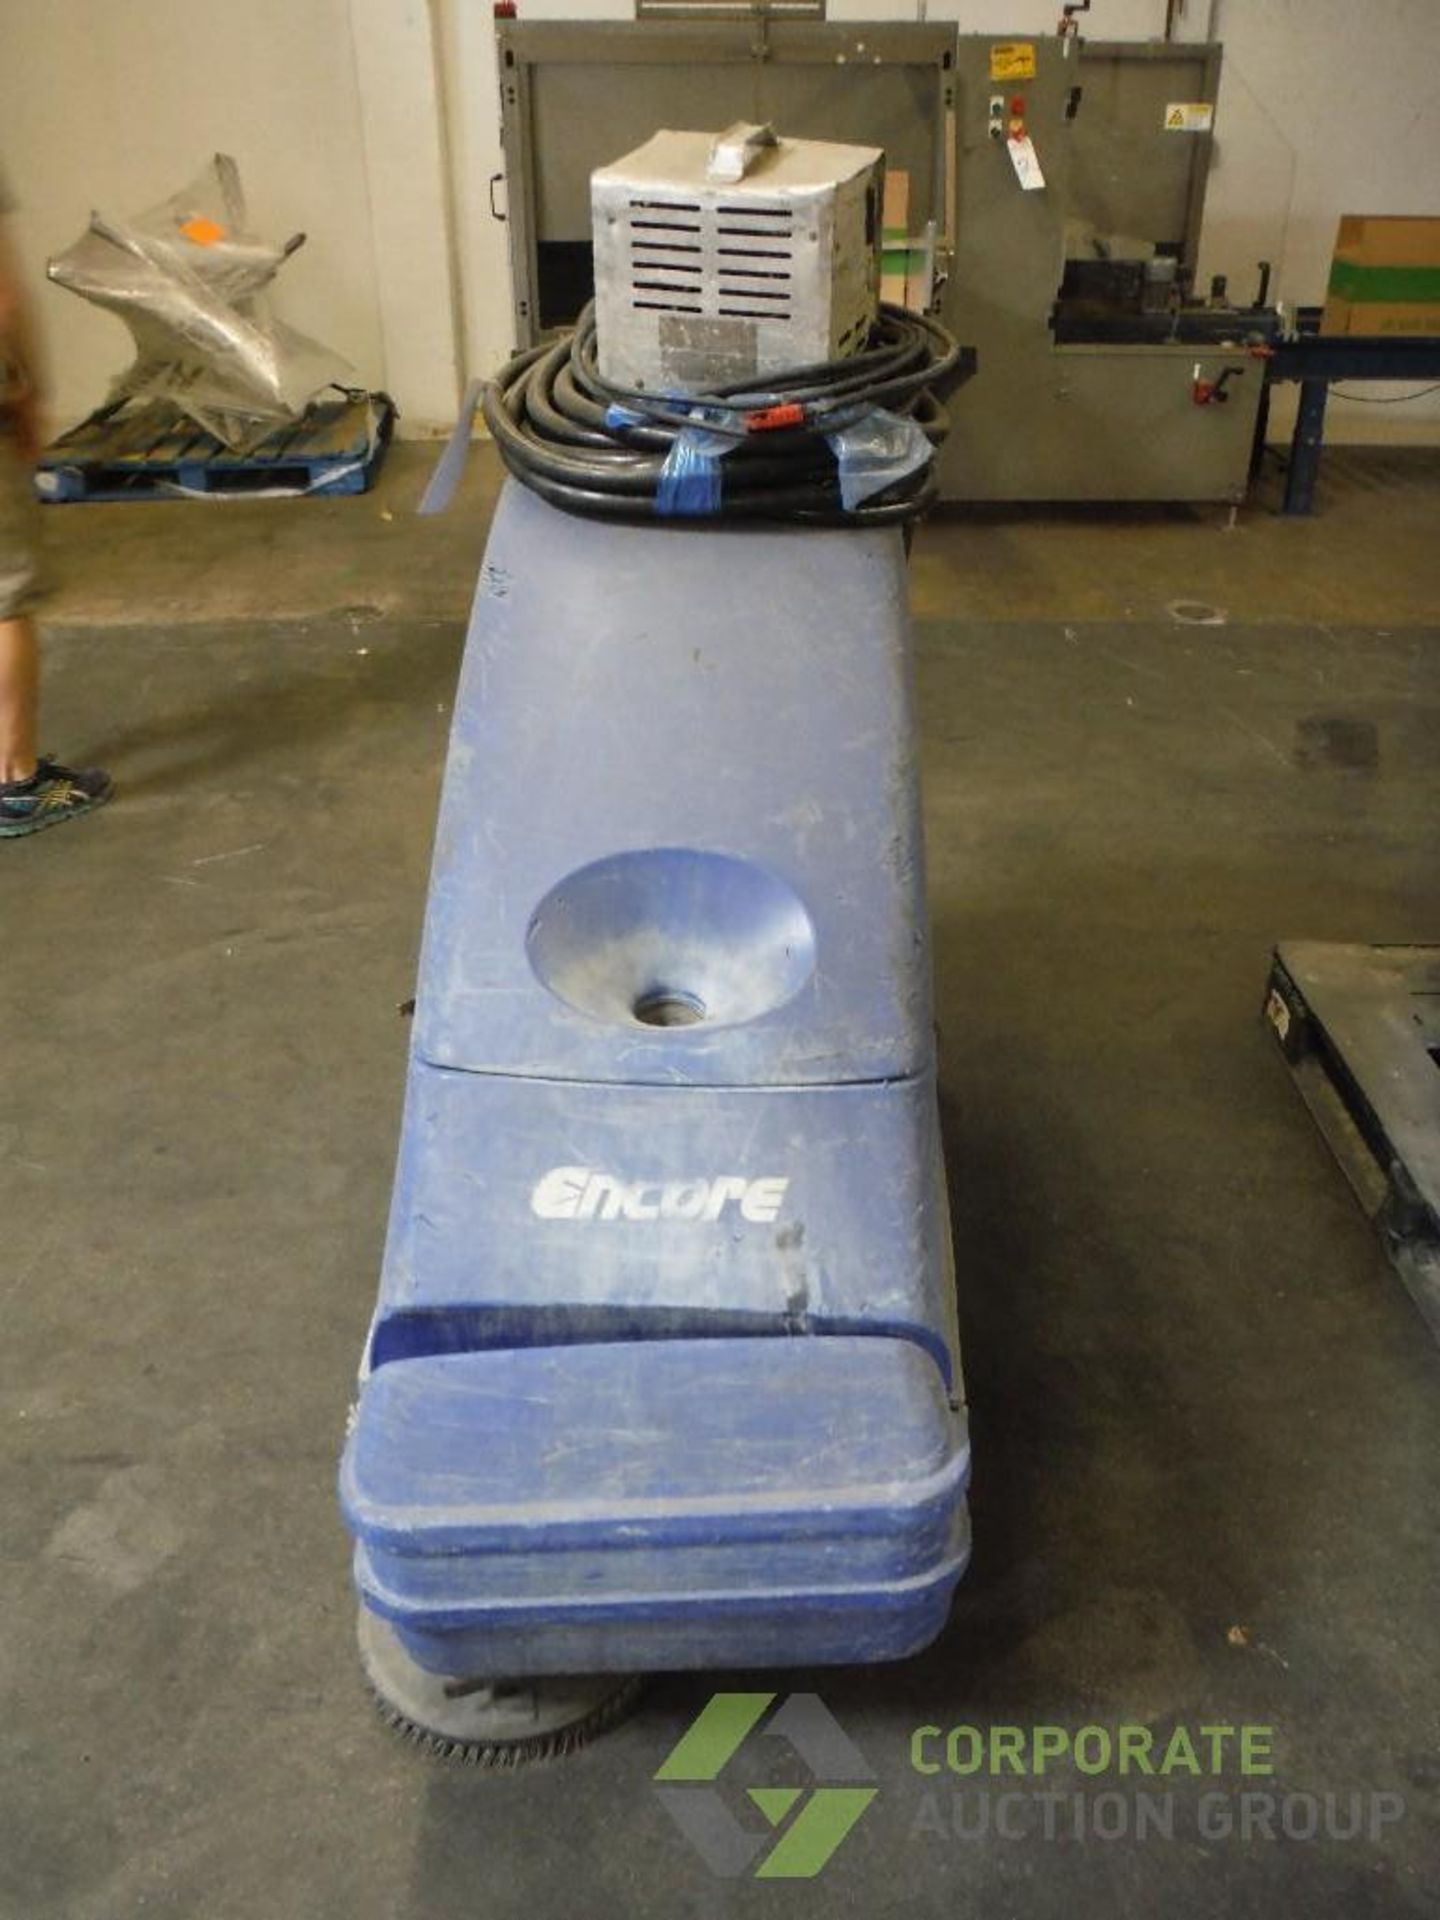 Clarke walk behind floor scrubber, Model Encore L24263300AHPADS, SN CJ1131, 24 volt, with charger - Image 3 of 8